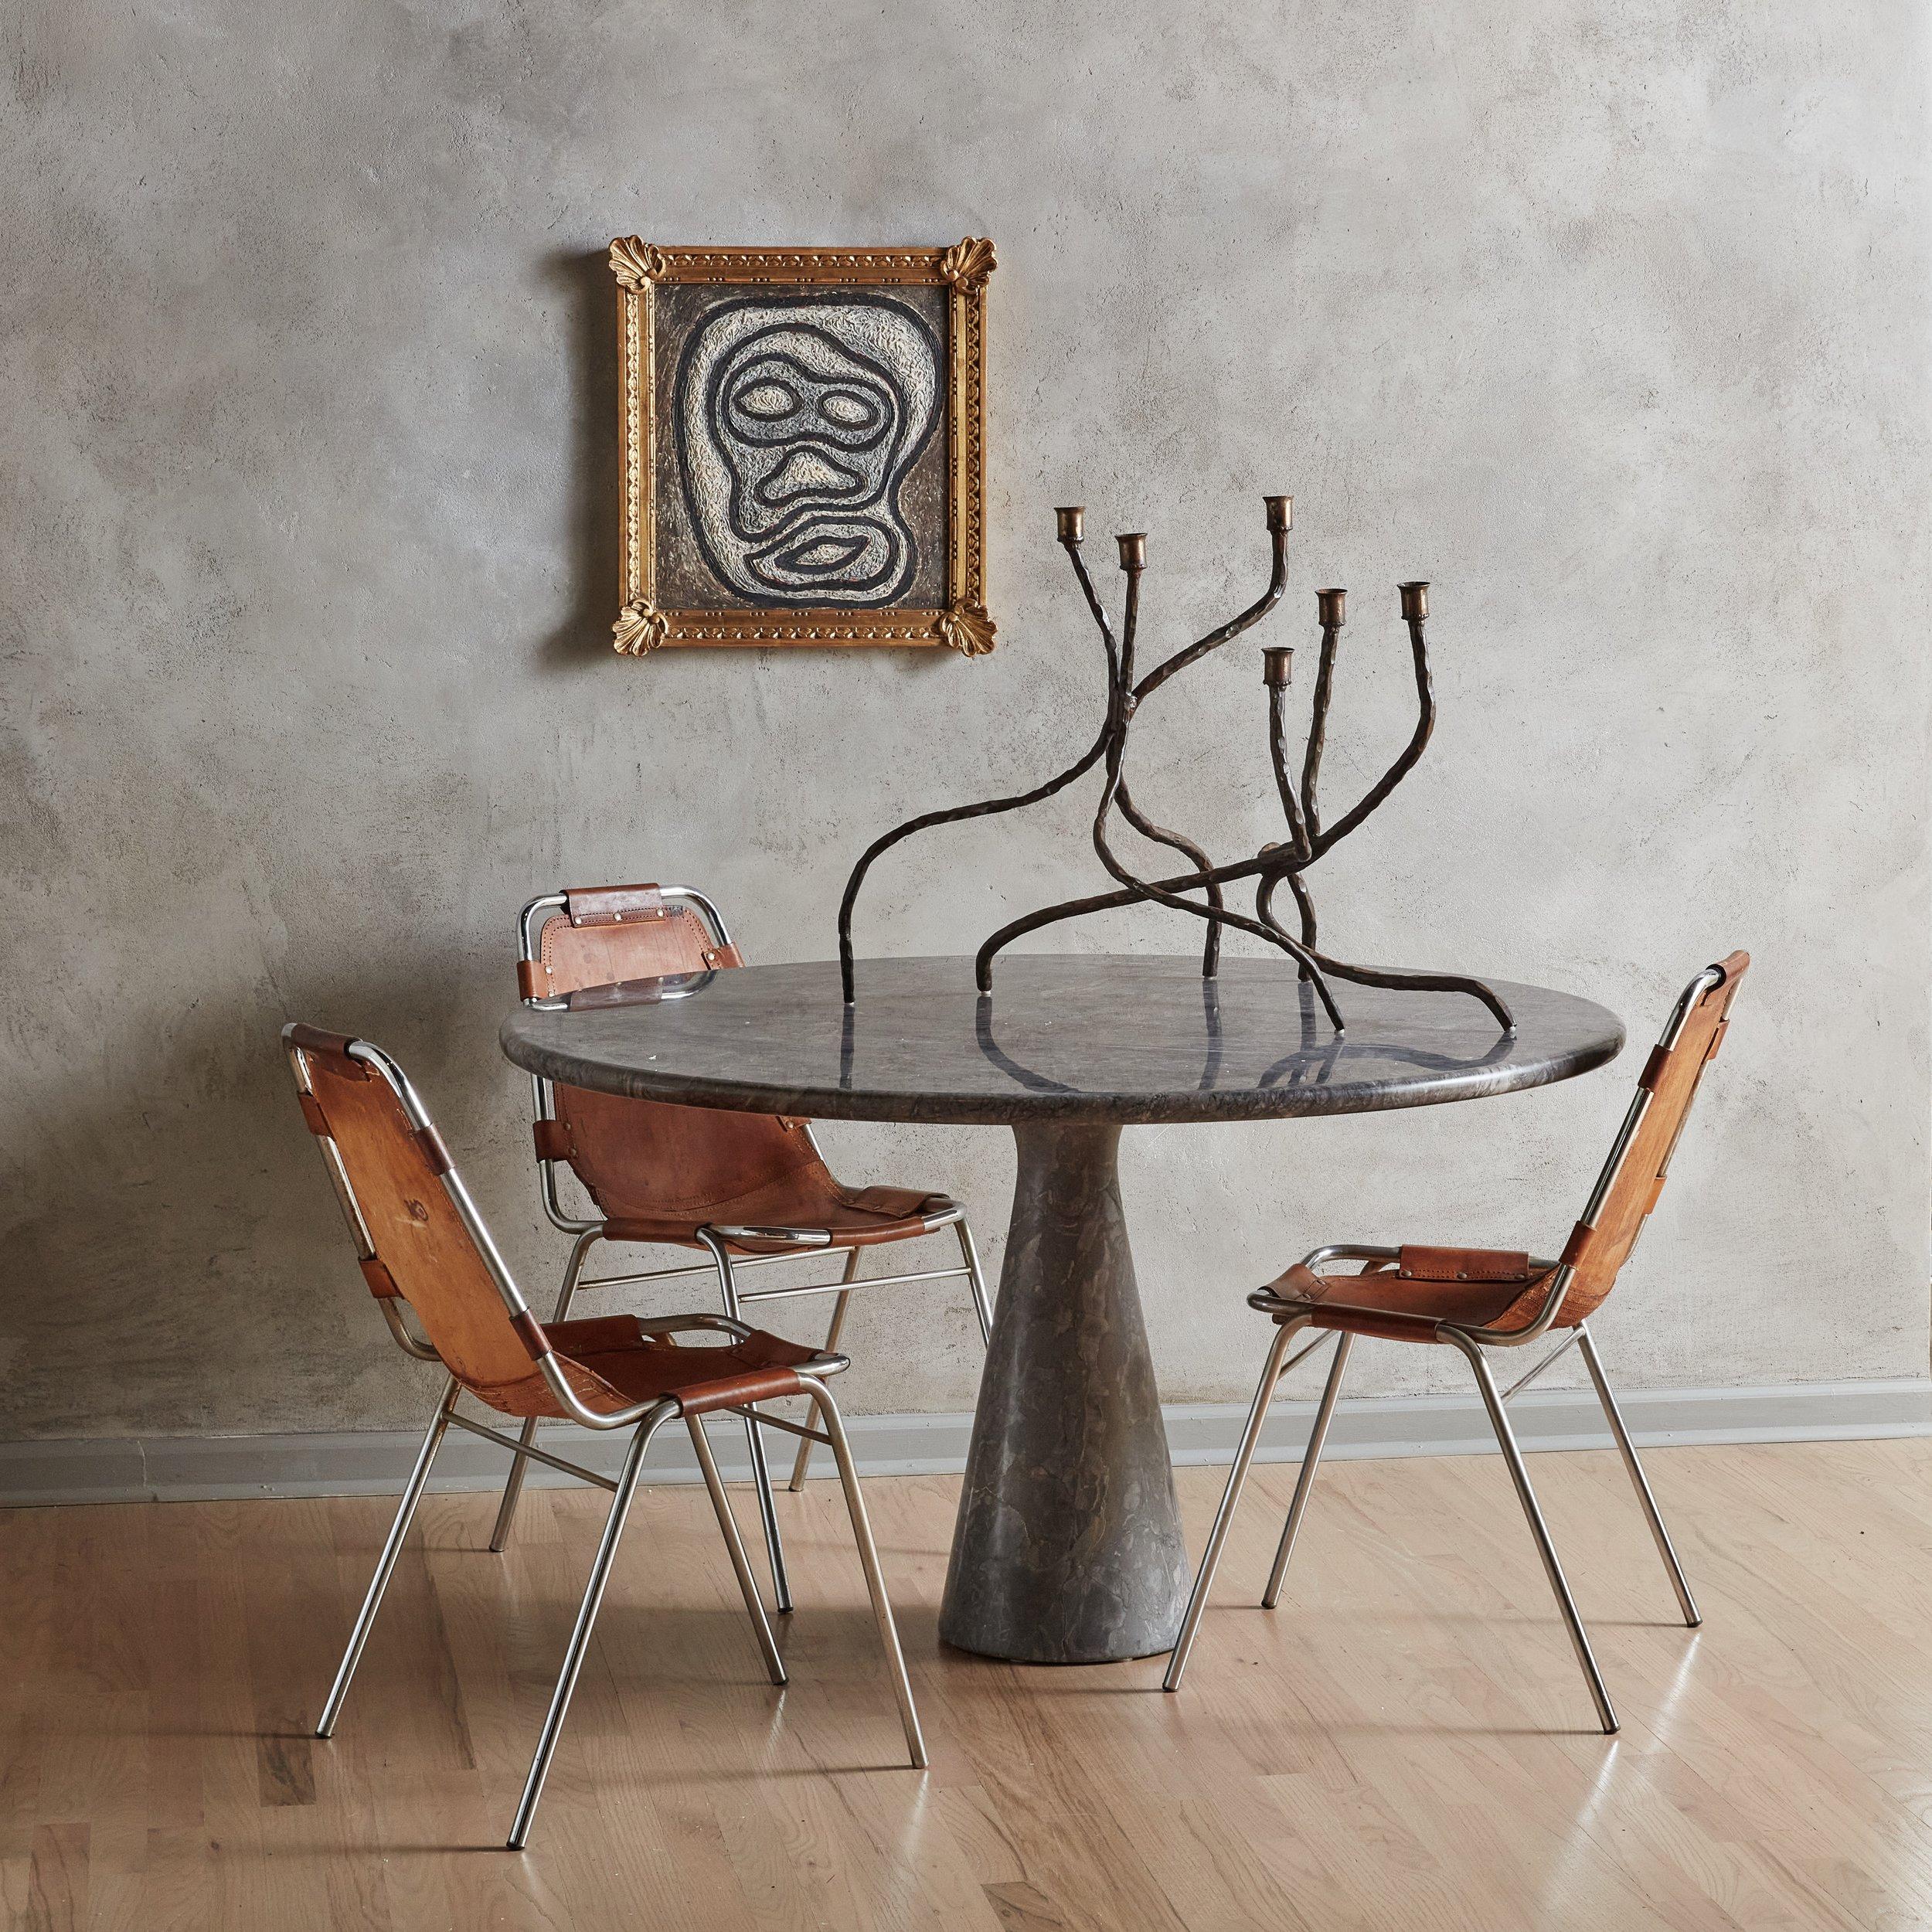 A rare M1 T70 Table was designed by Mangiarotti in 1969 for Skipper. Mangiarotti’s vision was to create a table that respected the materiality of the marble without utilizing any joints in the design. The heavy table top rests on the conical